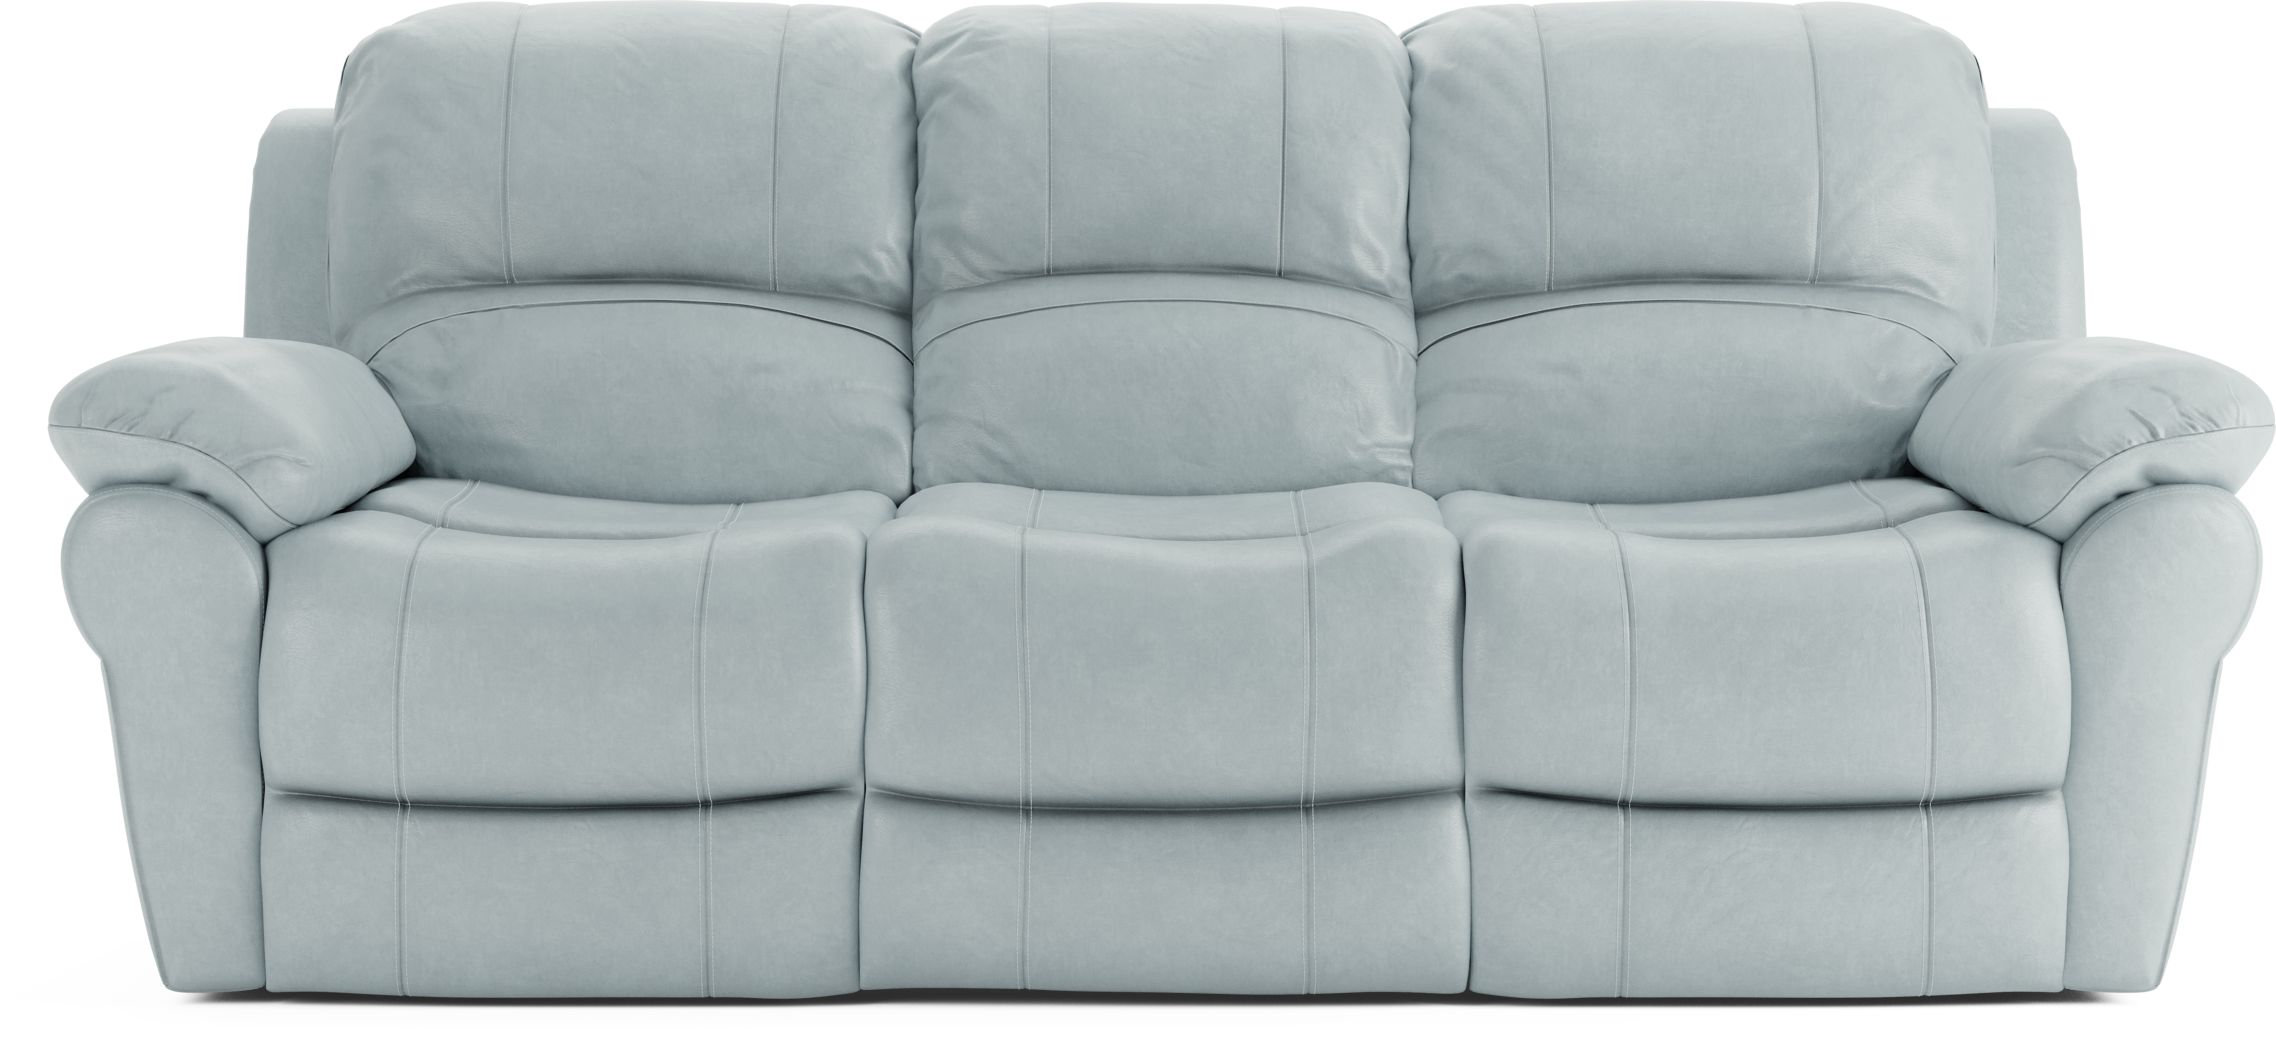 reviews on vercelli stone leather reclining sofa